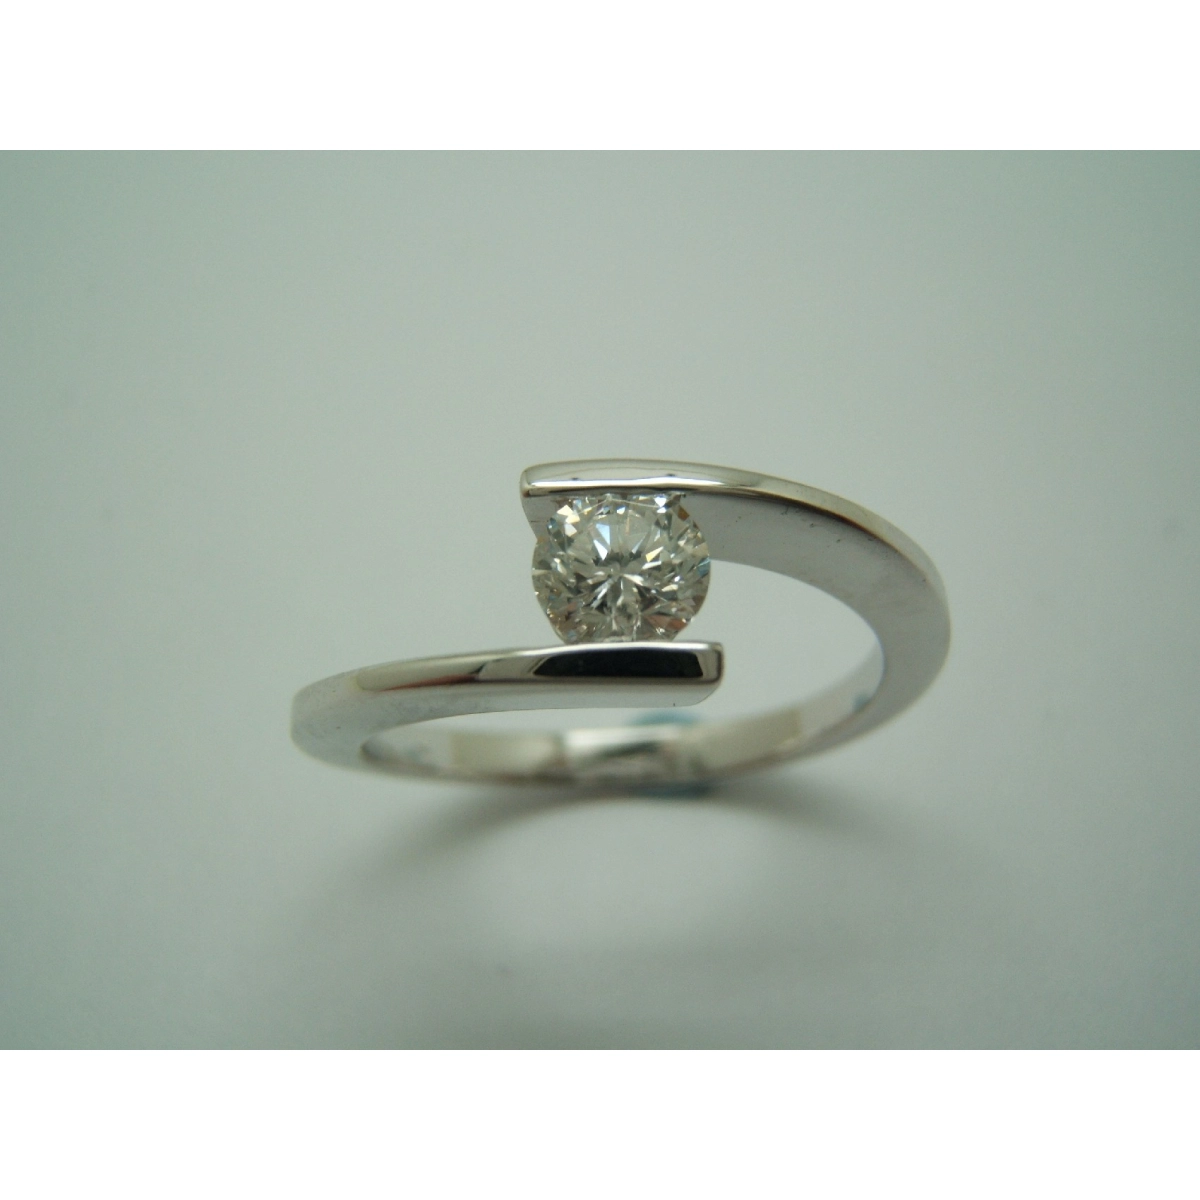 RING SOLITAIRE WHITE GOLD AND DIAMOND B-79